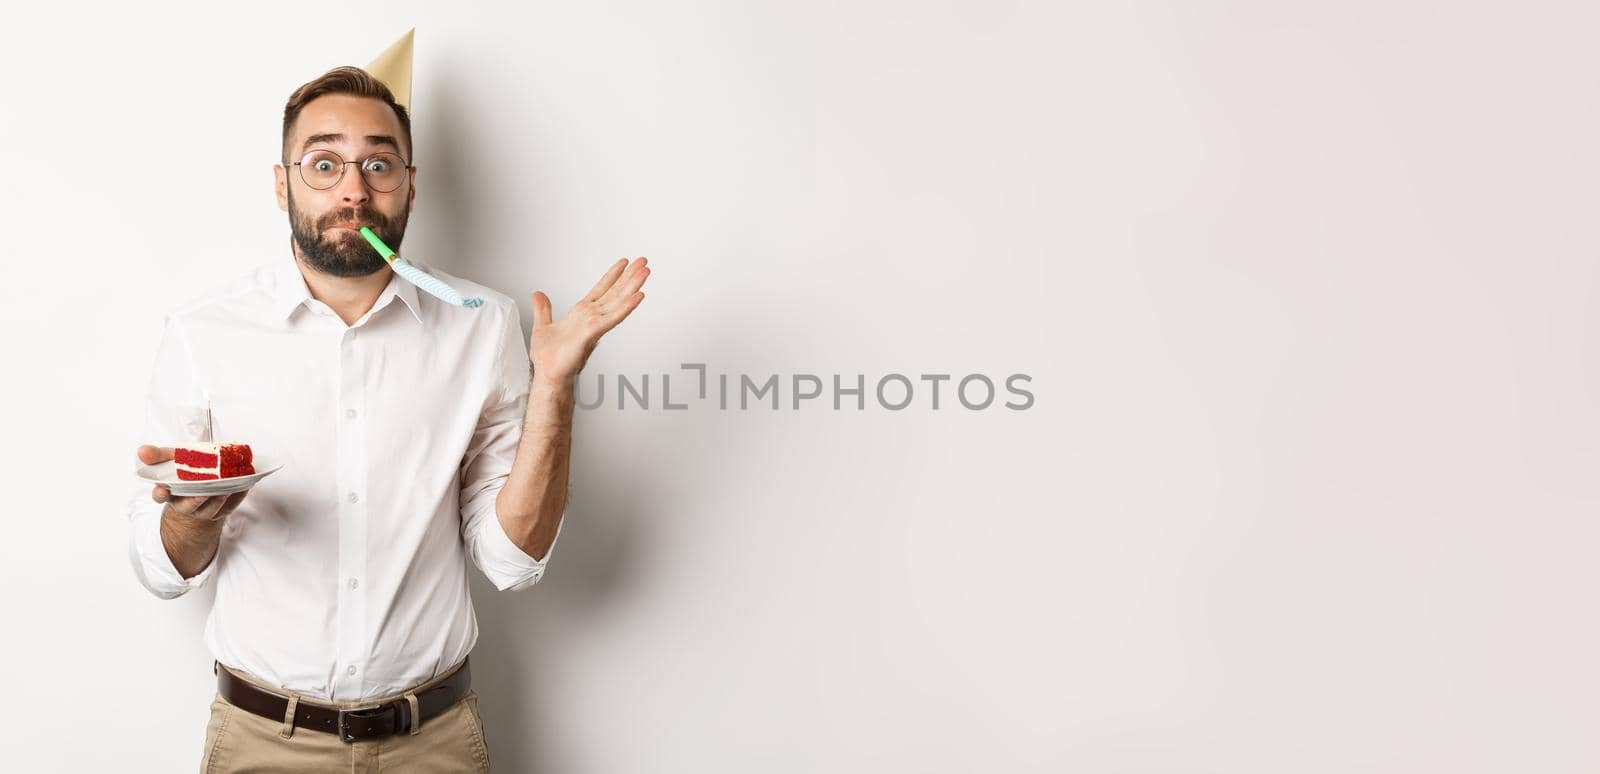 Holidays and celebration. Cheerful man enjoying birthday, blowing party whistle and holding bday cake, white background.